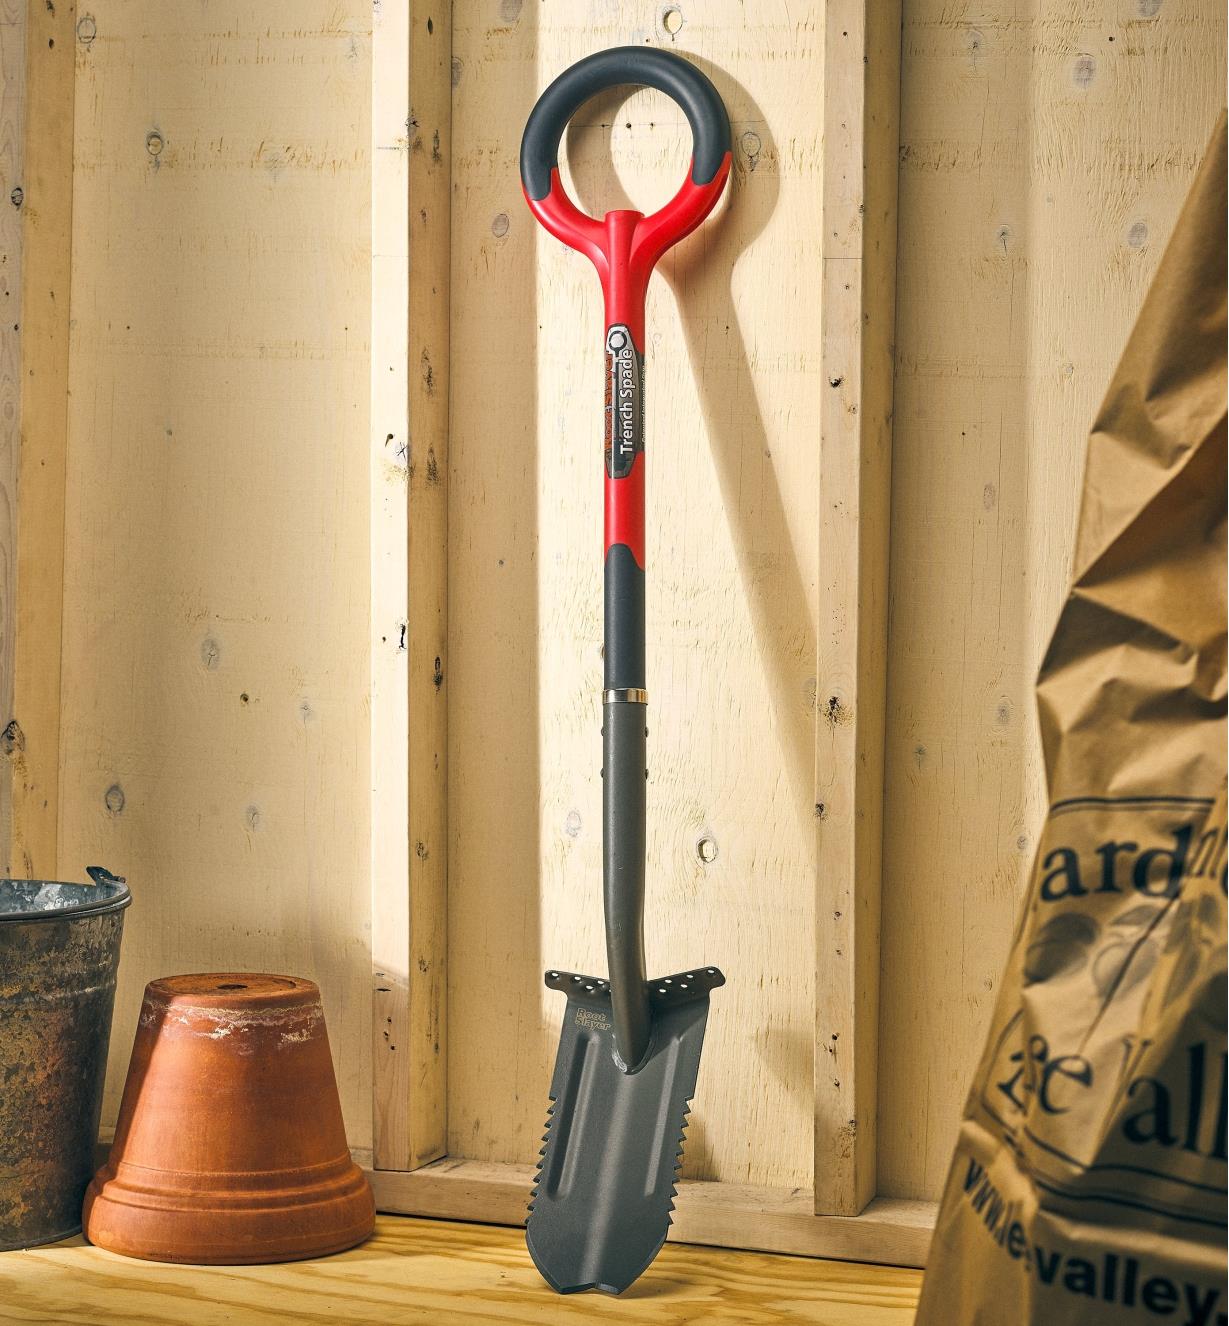 A Radius root cutter trenching spade leaning against the wall of a garden shed.